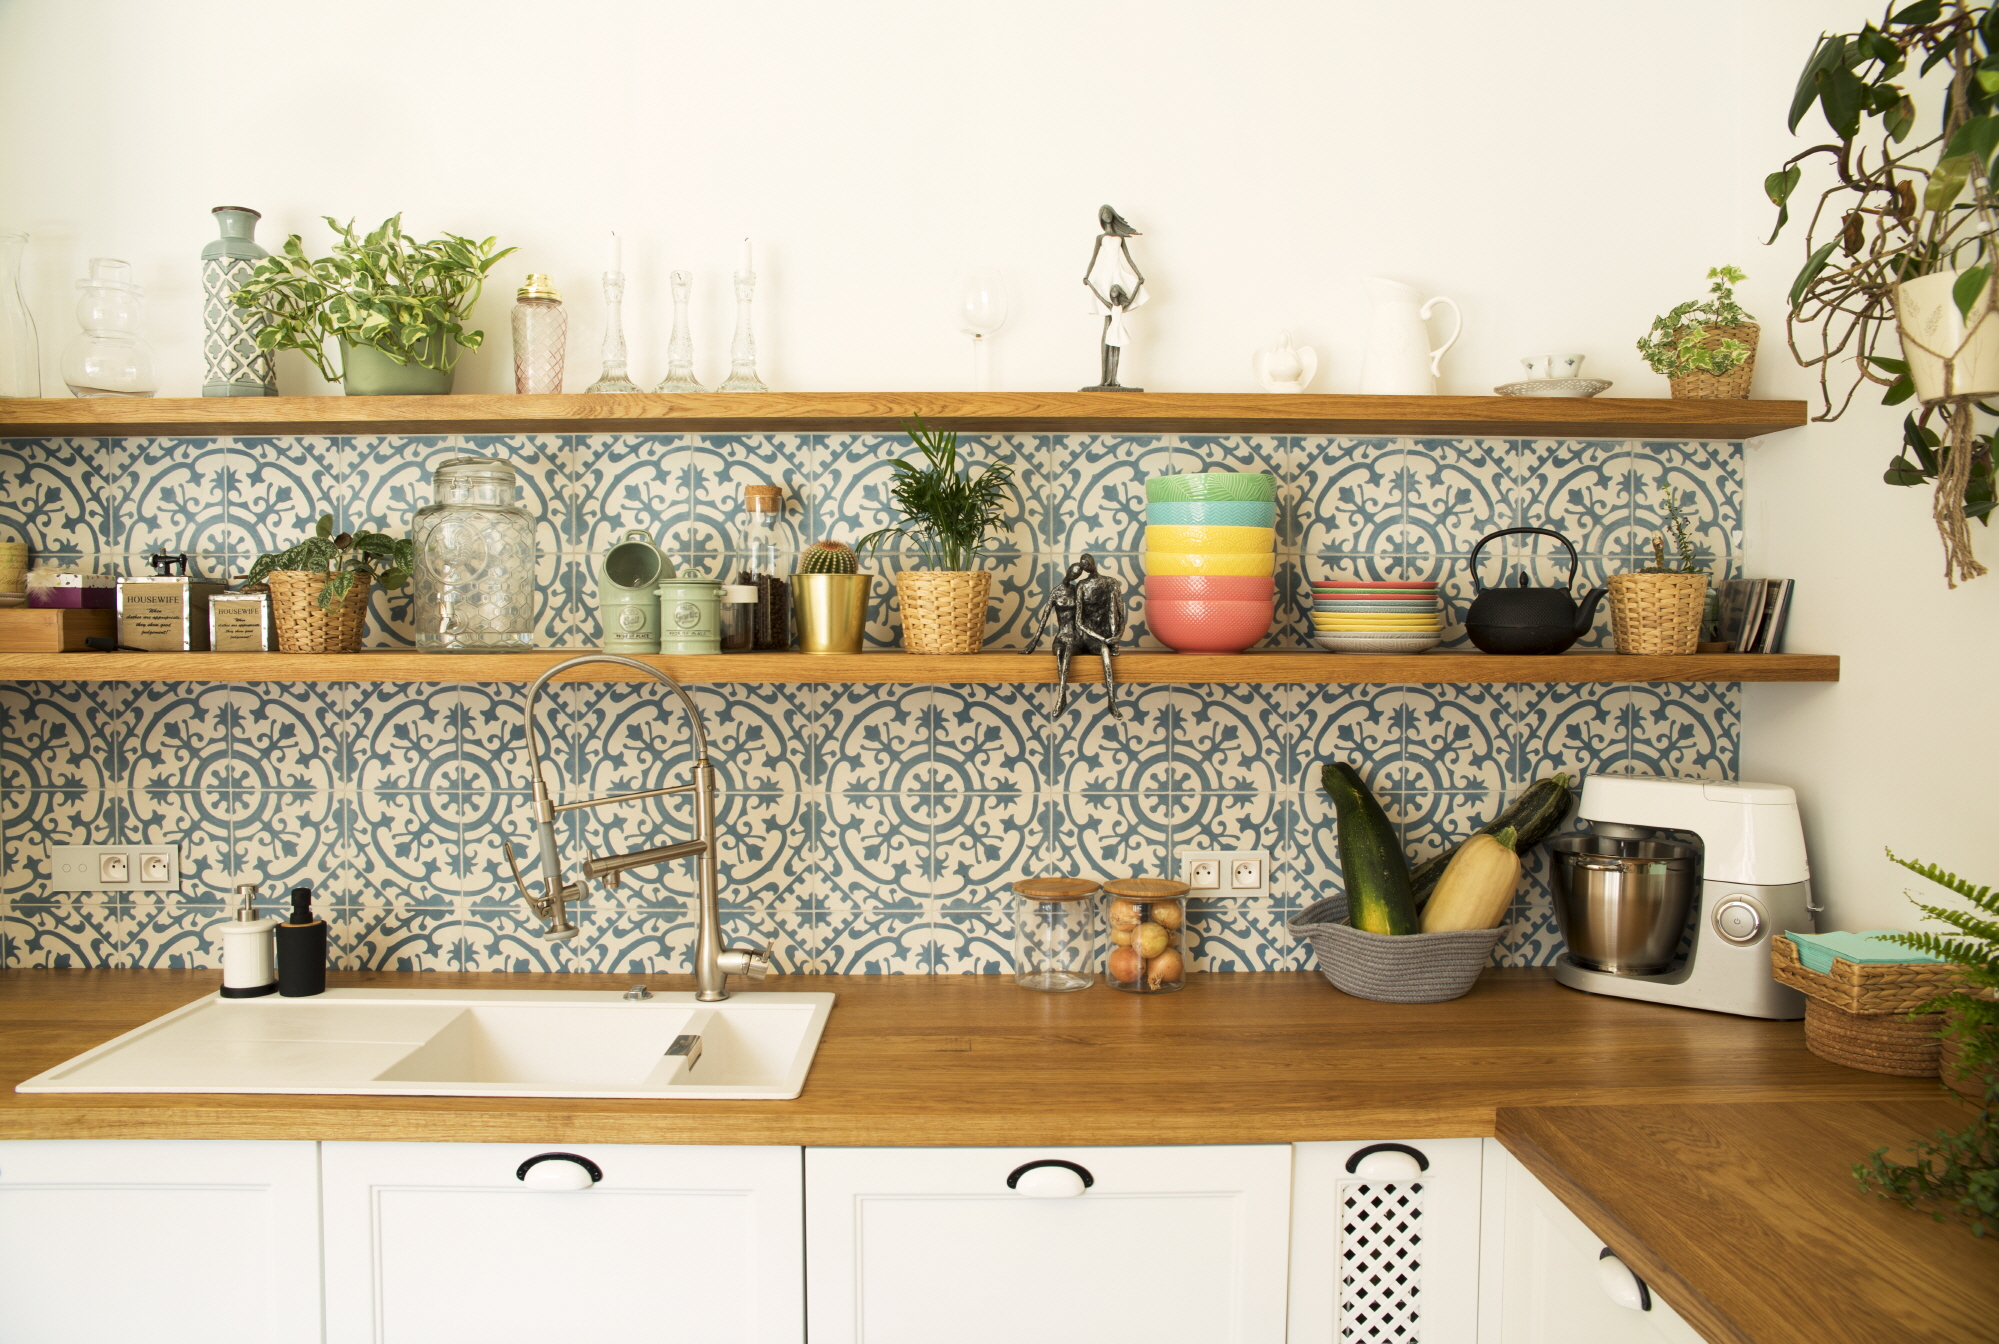 Adopt maximalism in small kitchens with vibrant patterns and warm tones.